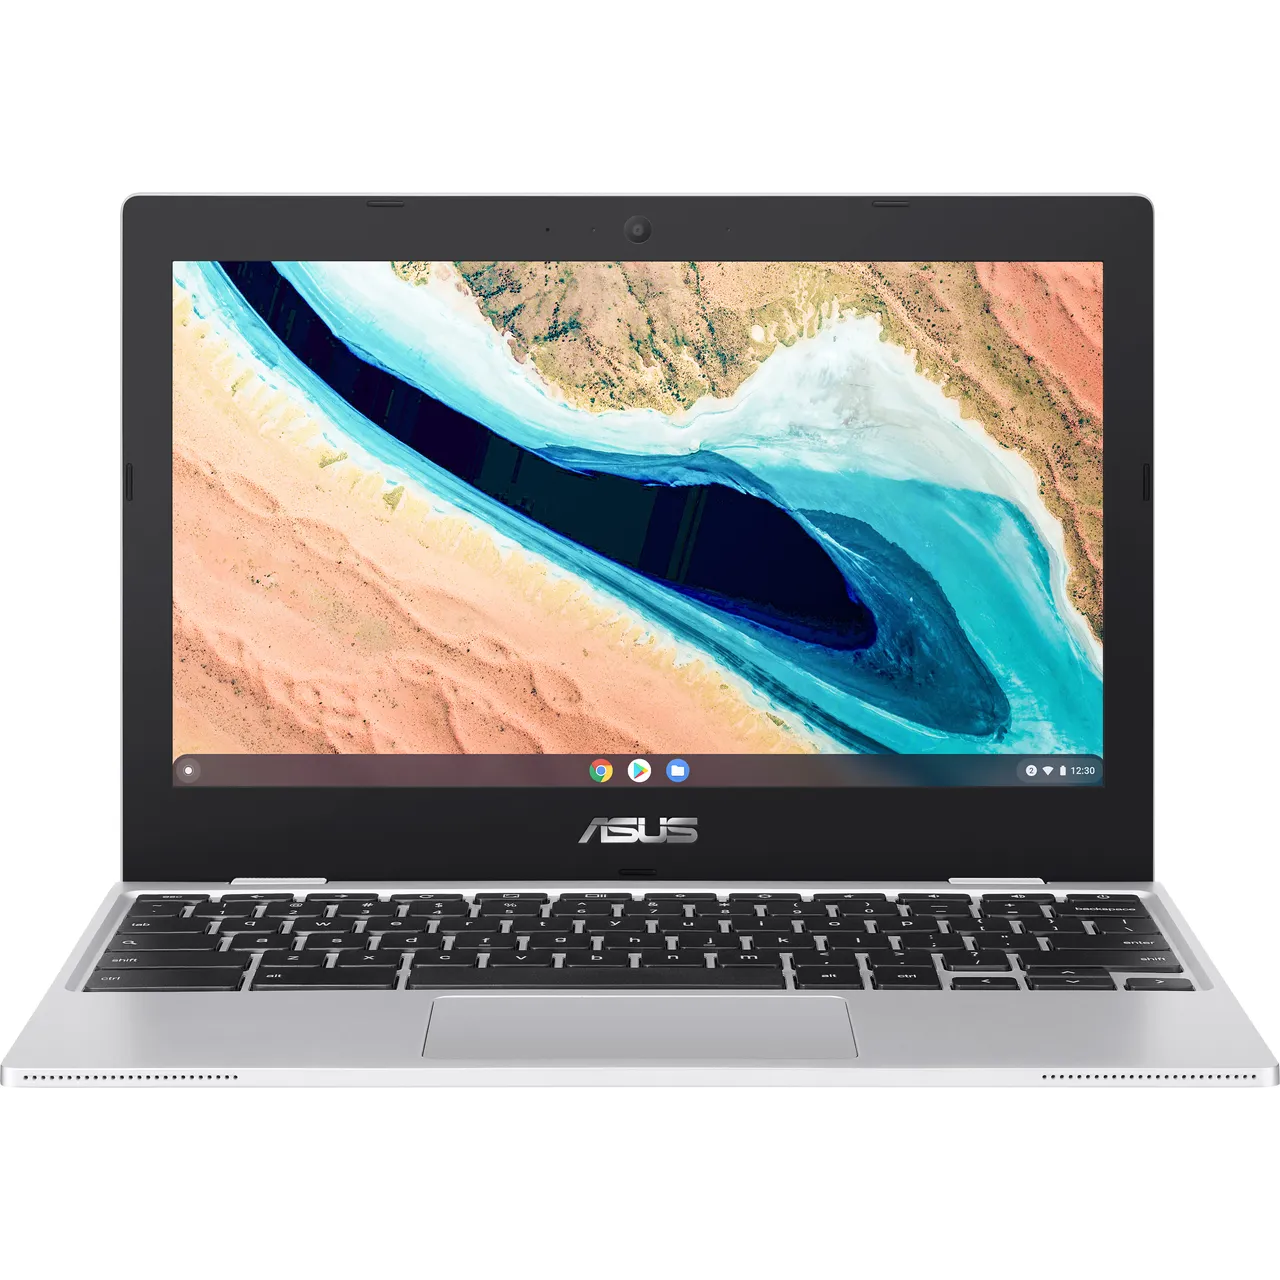 Asus Chromebook CX1101 11.6" HD Intel Celeron N 4GB/64GB Laptop - Silver | CX1101CMA-GJ0009 from Asus - DID Electrical